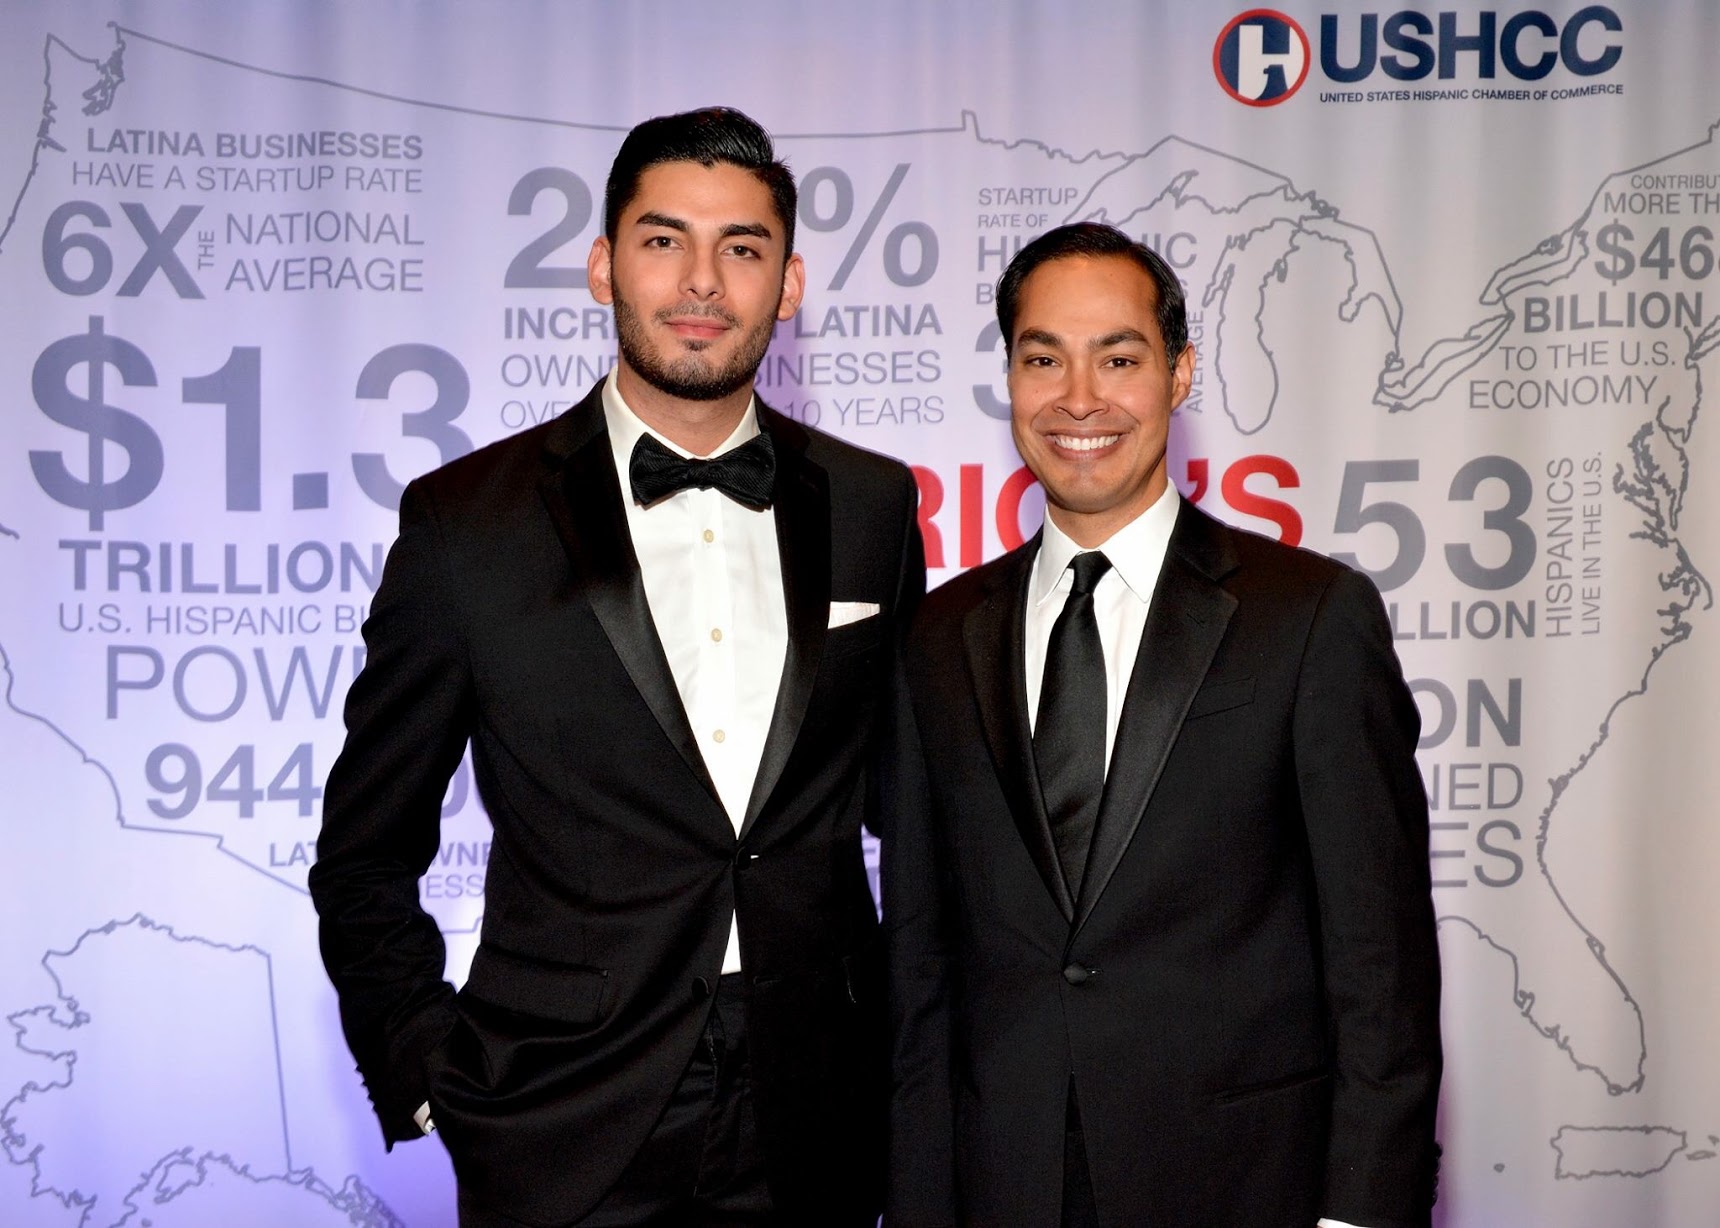 Ammar and Julian Castro at the US Hispanic Chamber of Commerce